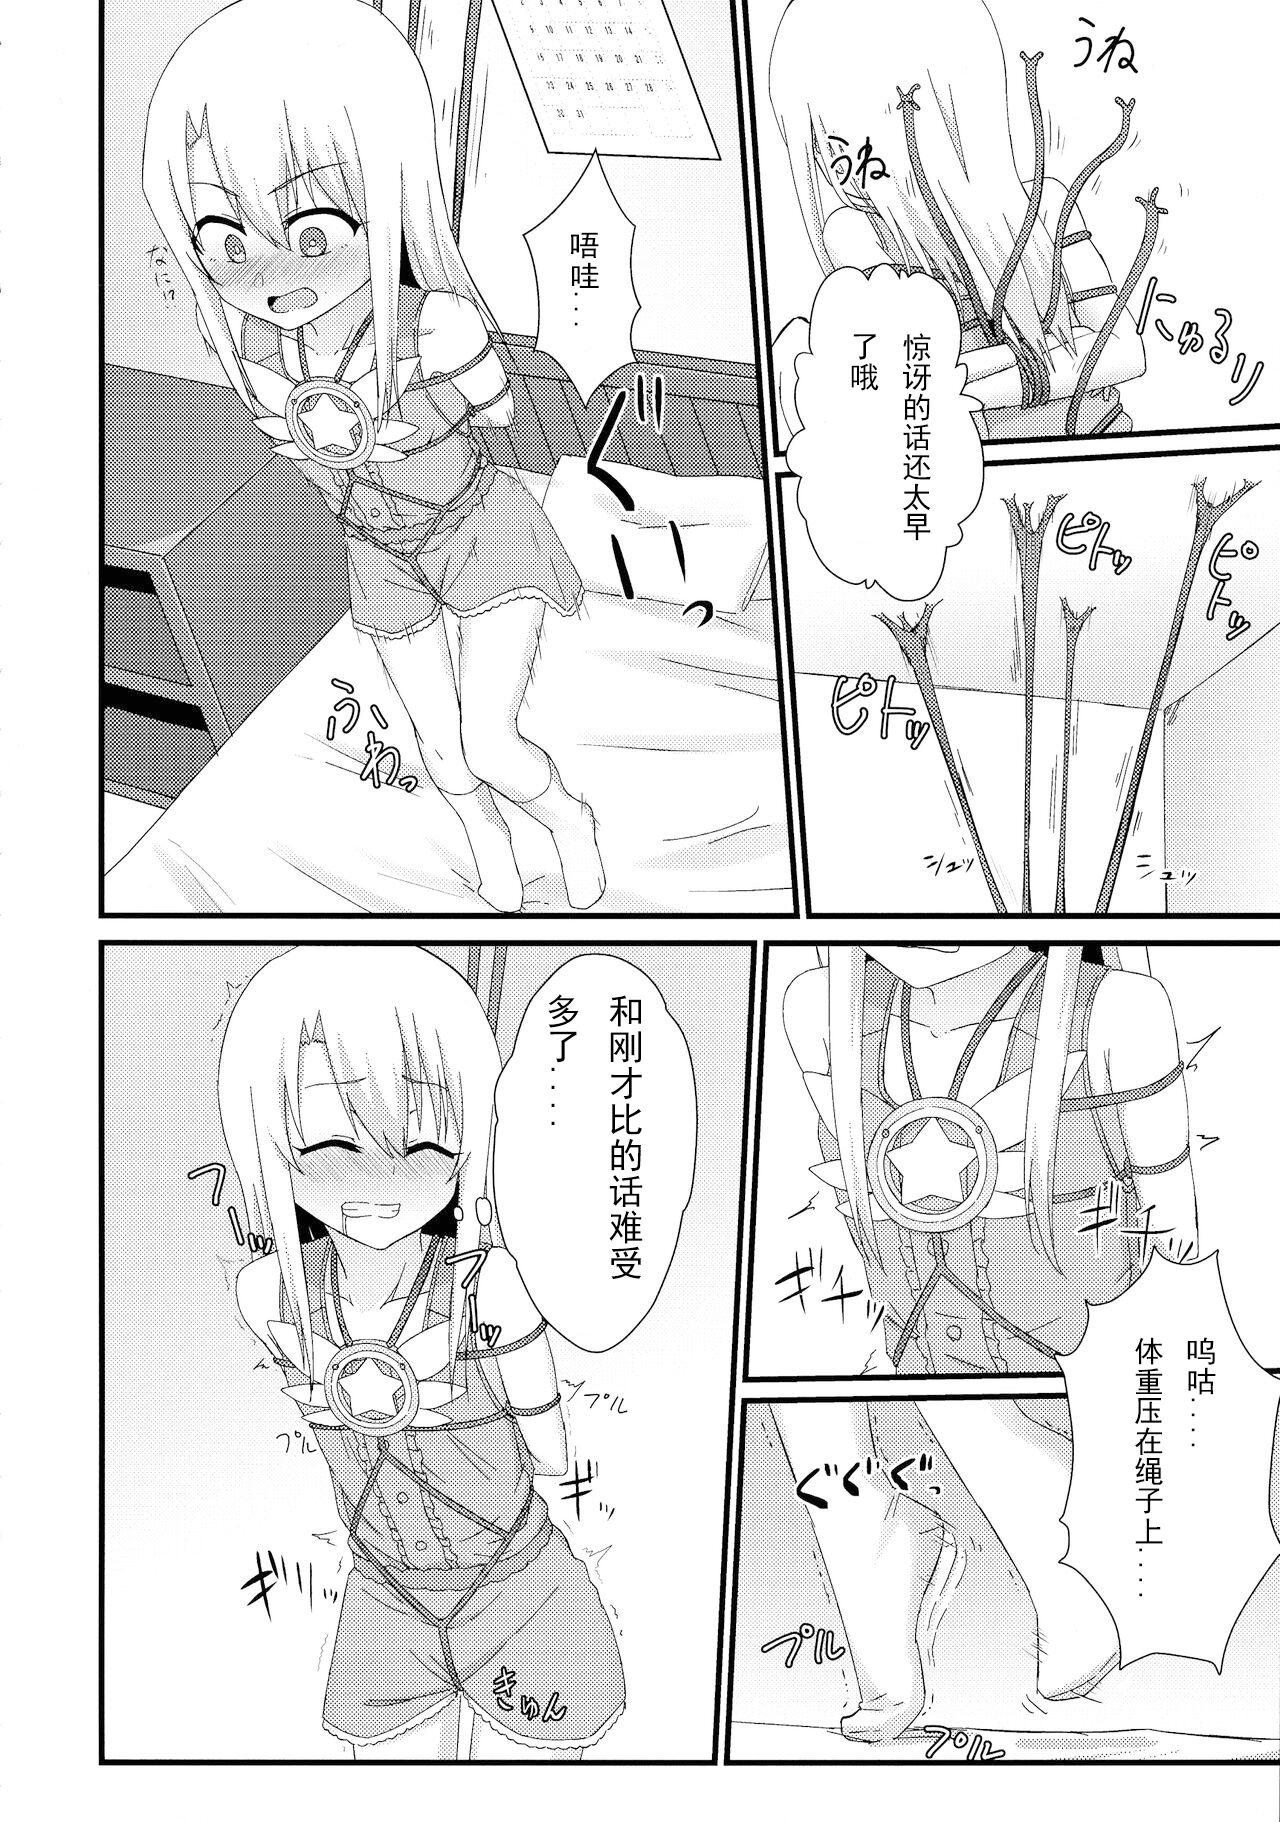 Pete Illya to Ruby Etchi Etchi Secret Function - Fate kaleid liner prisma illya Pain - Page 10